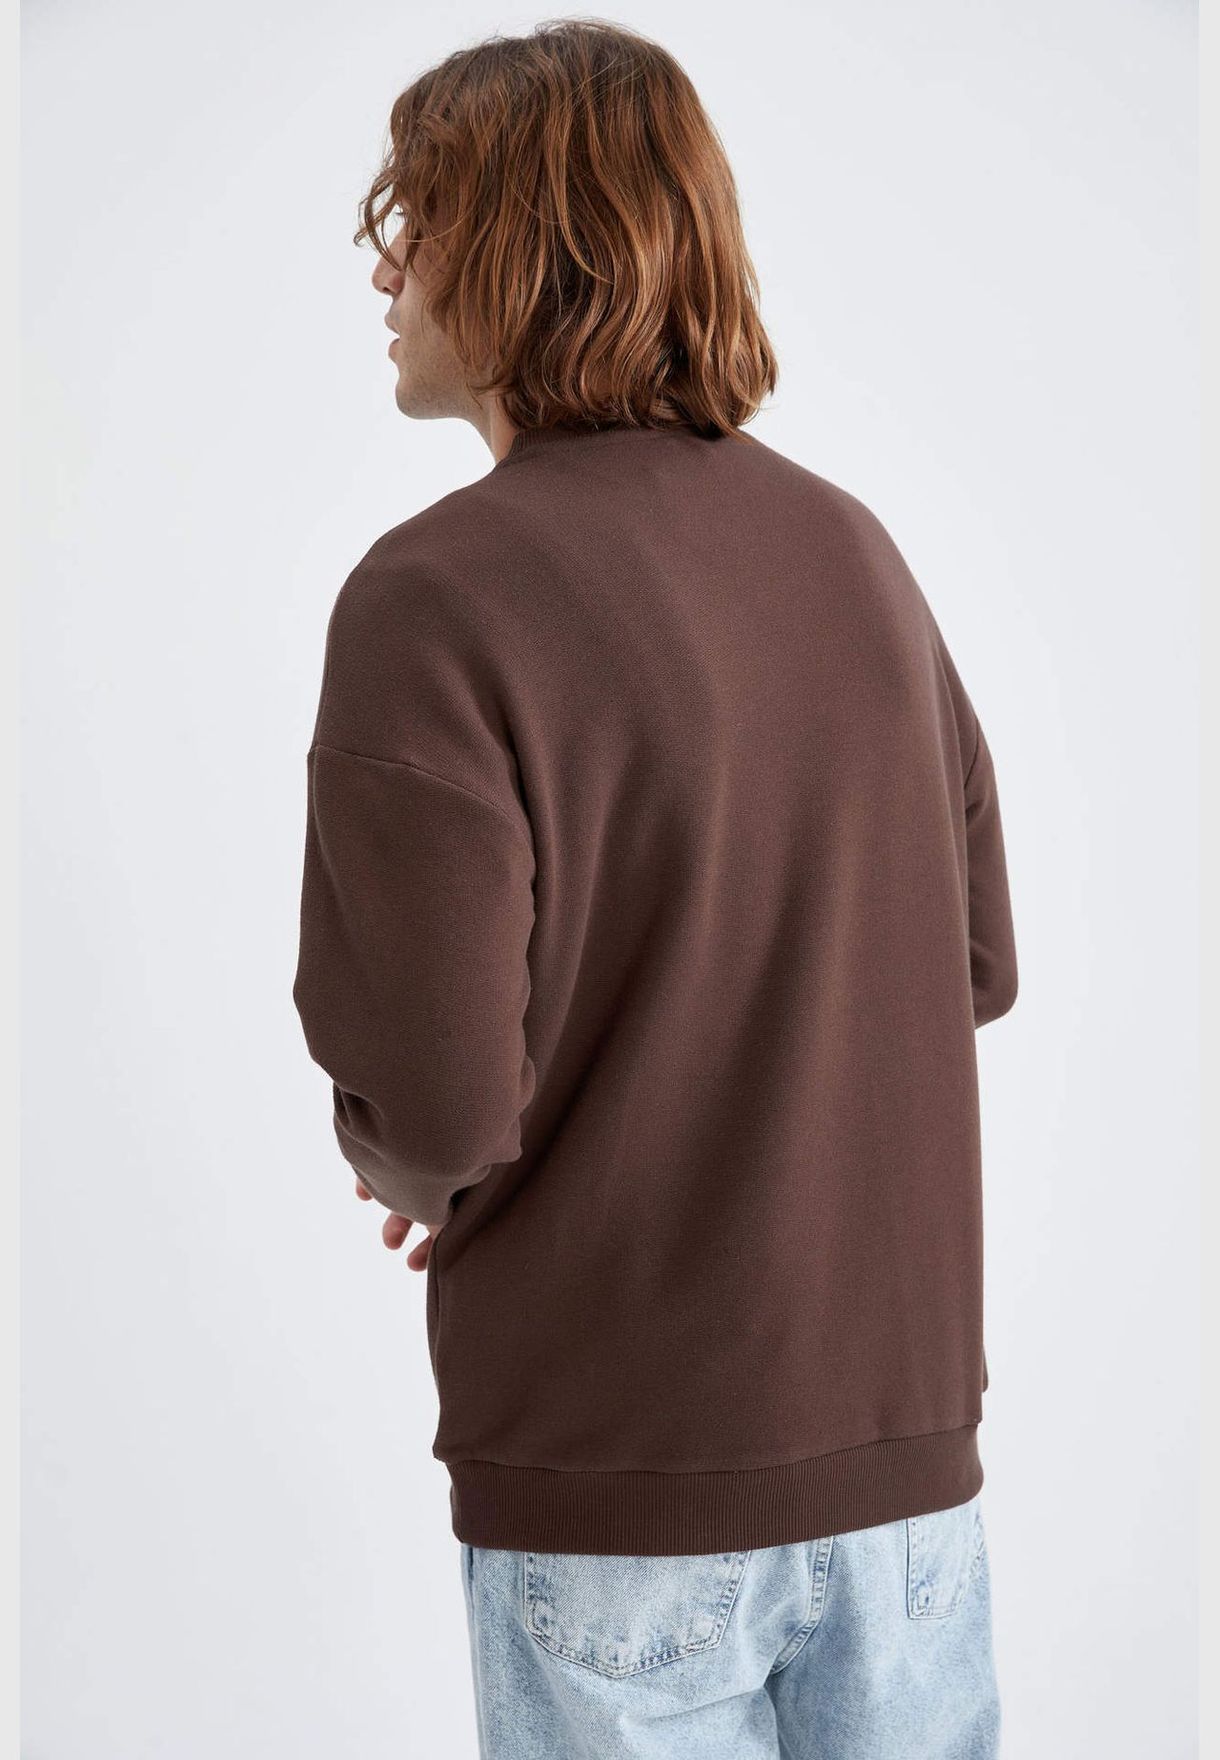 Man Comfort Fit Crew Neck Long Sleeve Knitted Sweat Shirt